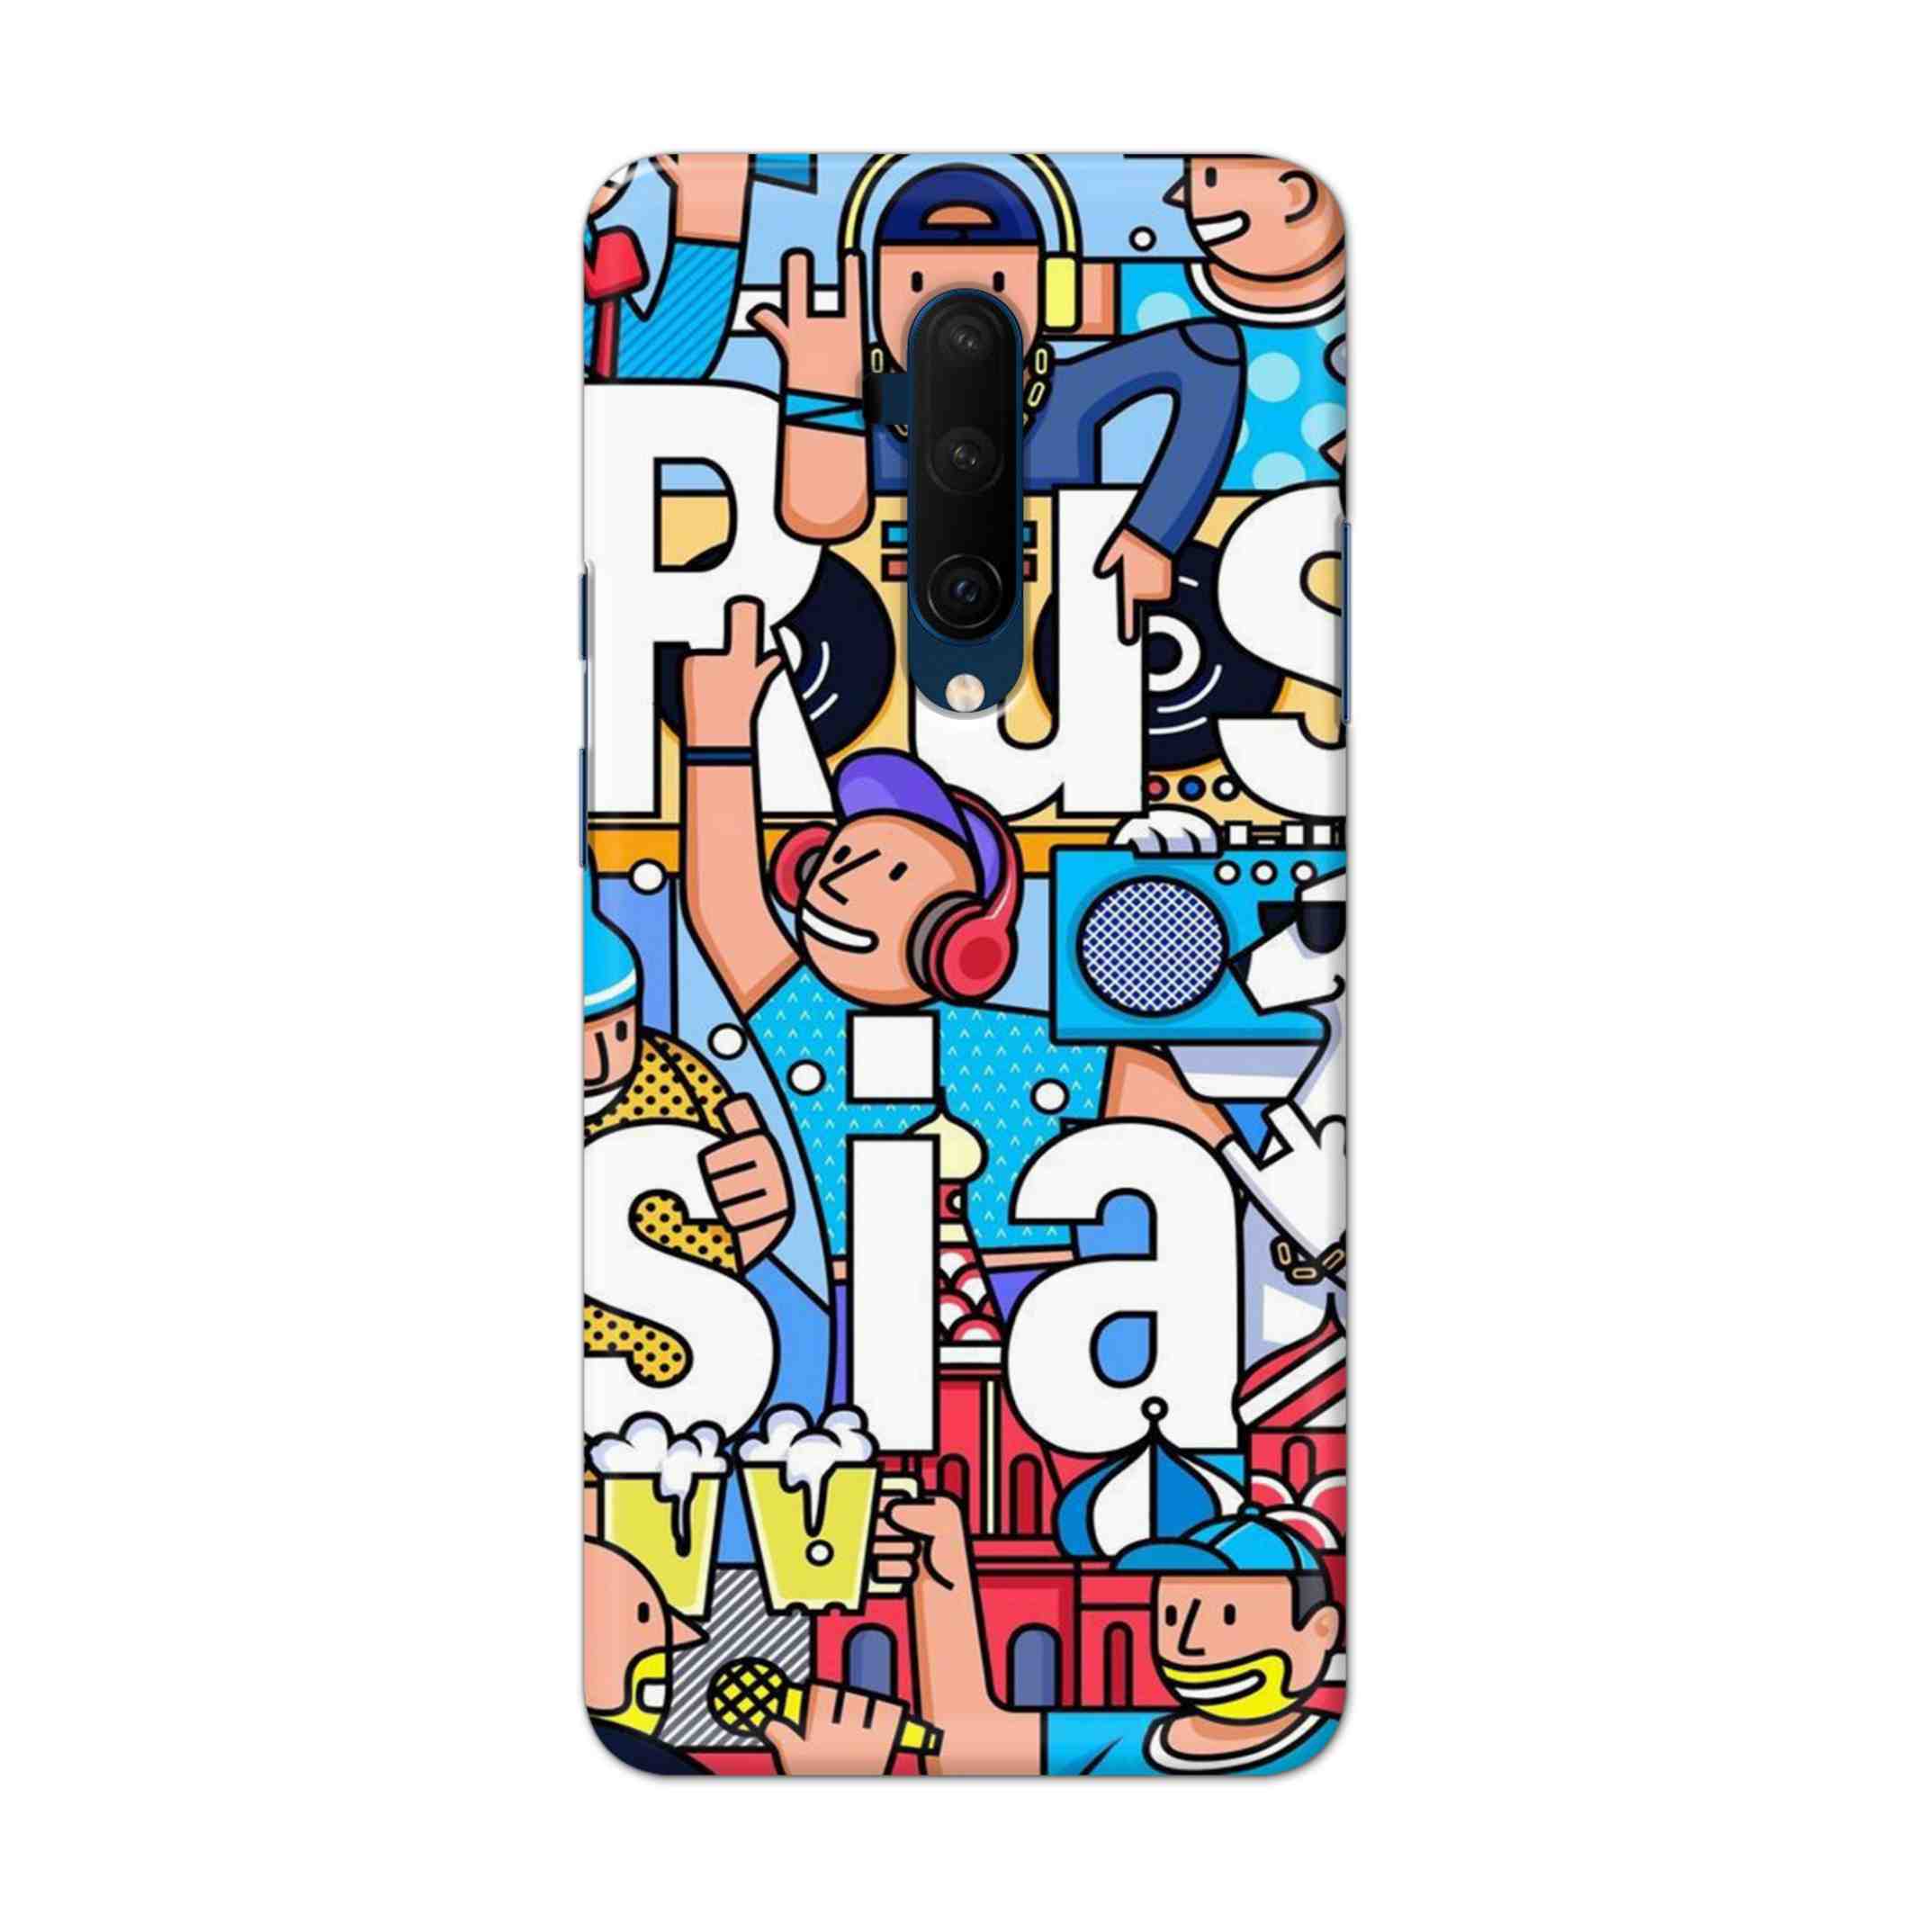 Buy Russia Hard Back Mobile Phone Case Cover For OnePlus 7T Pro Online